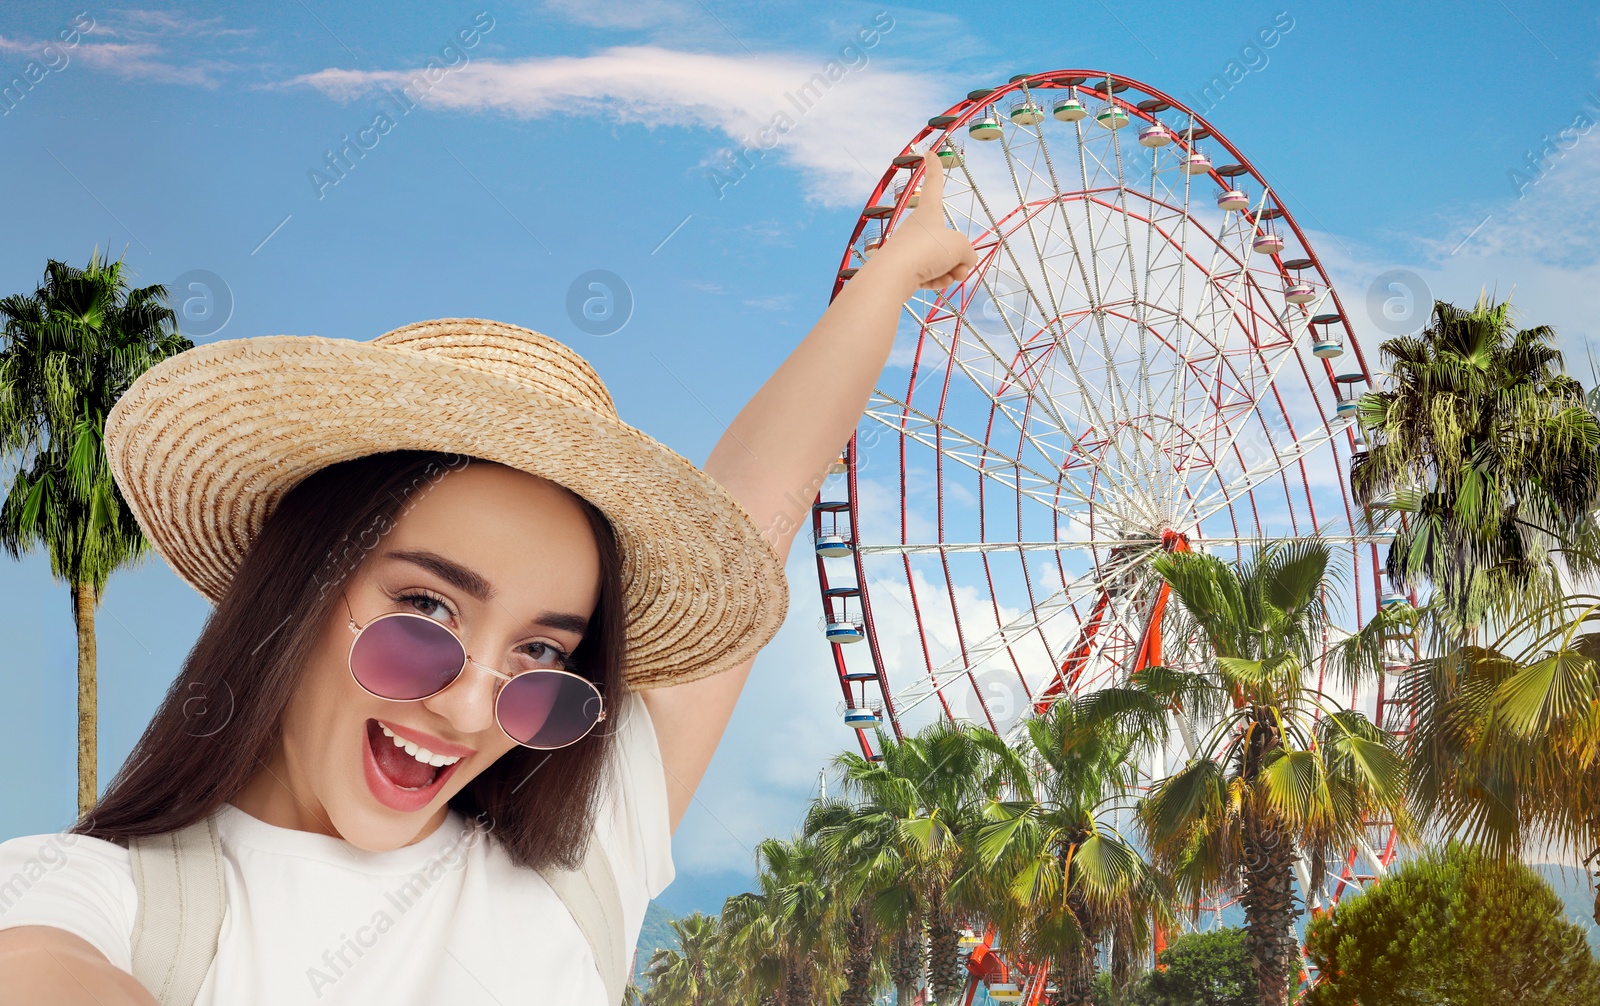 Image of Smiling young woman pointing at observation wheel while taking selfie outdoors